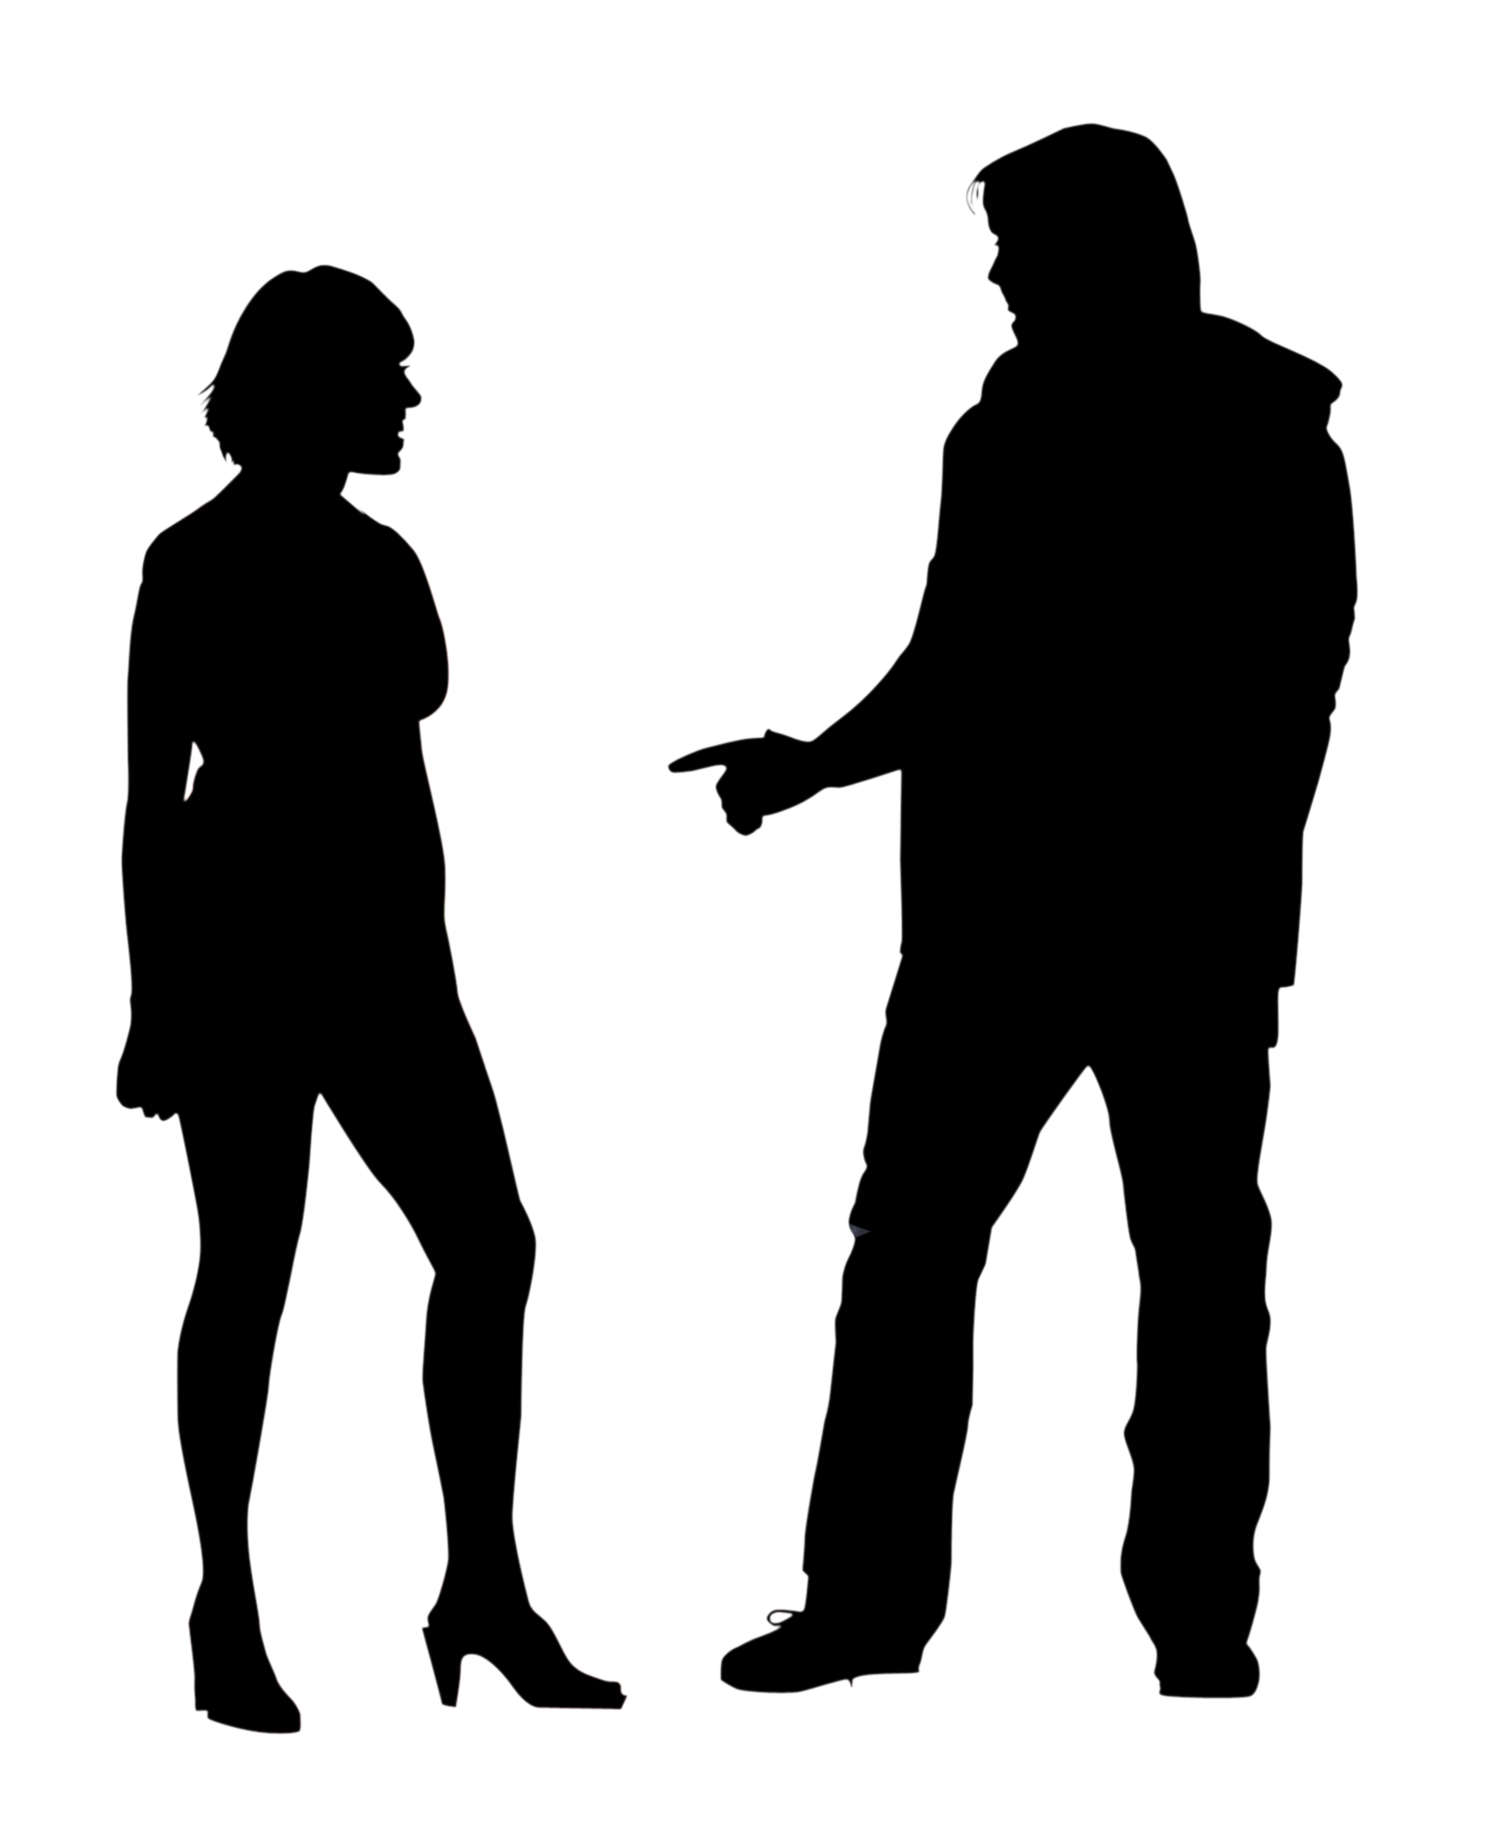 Images Of People Talking - ClipArt Best